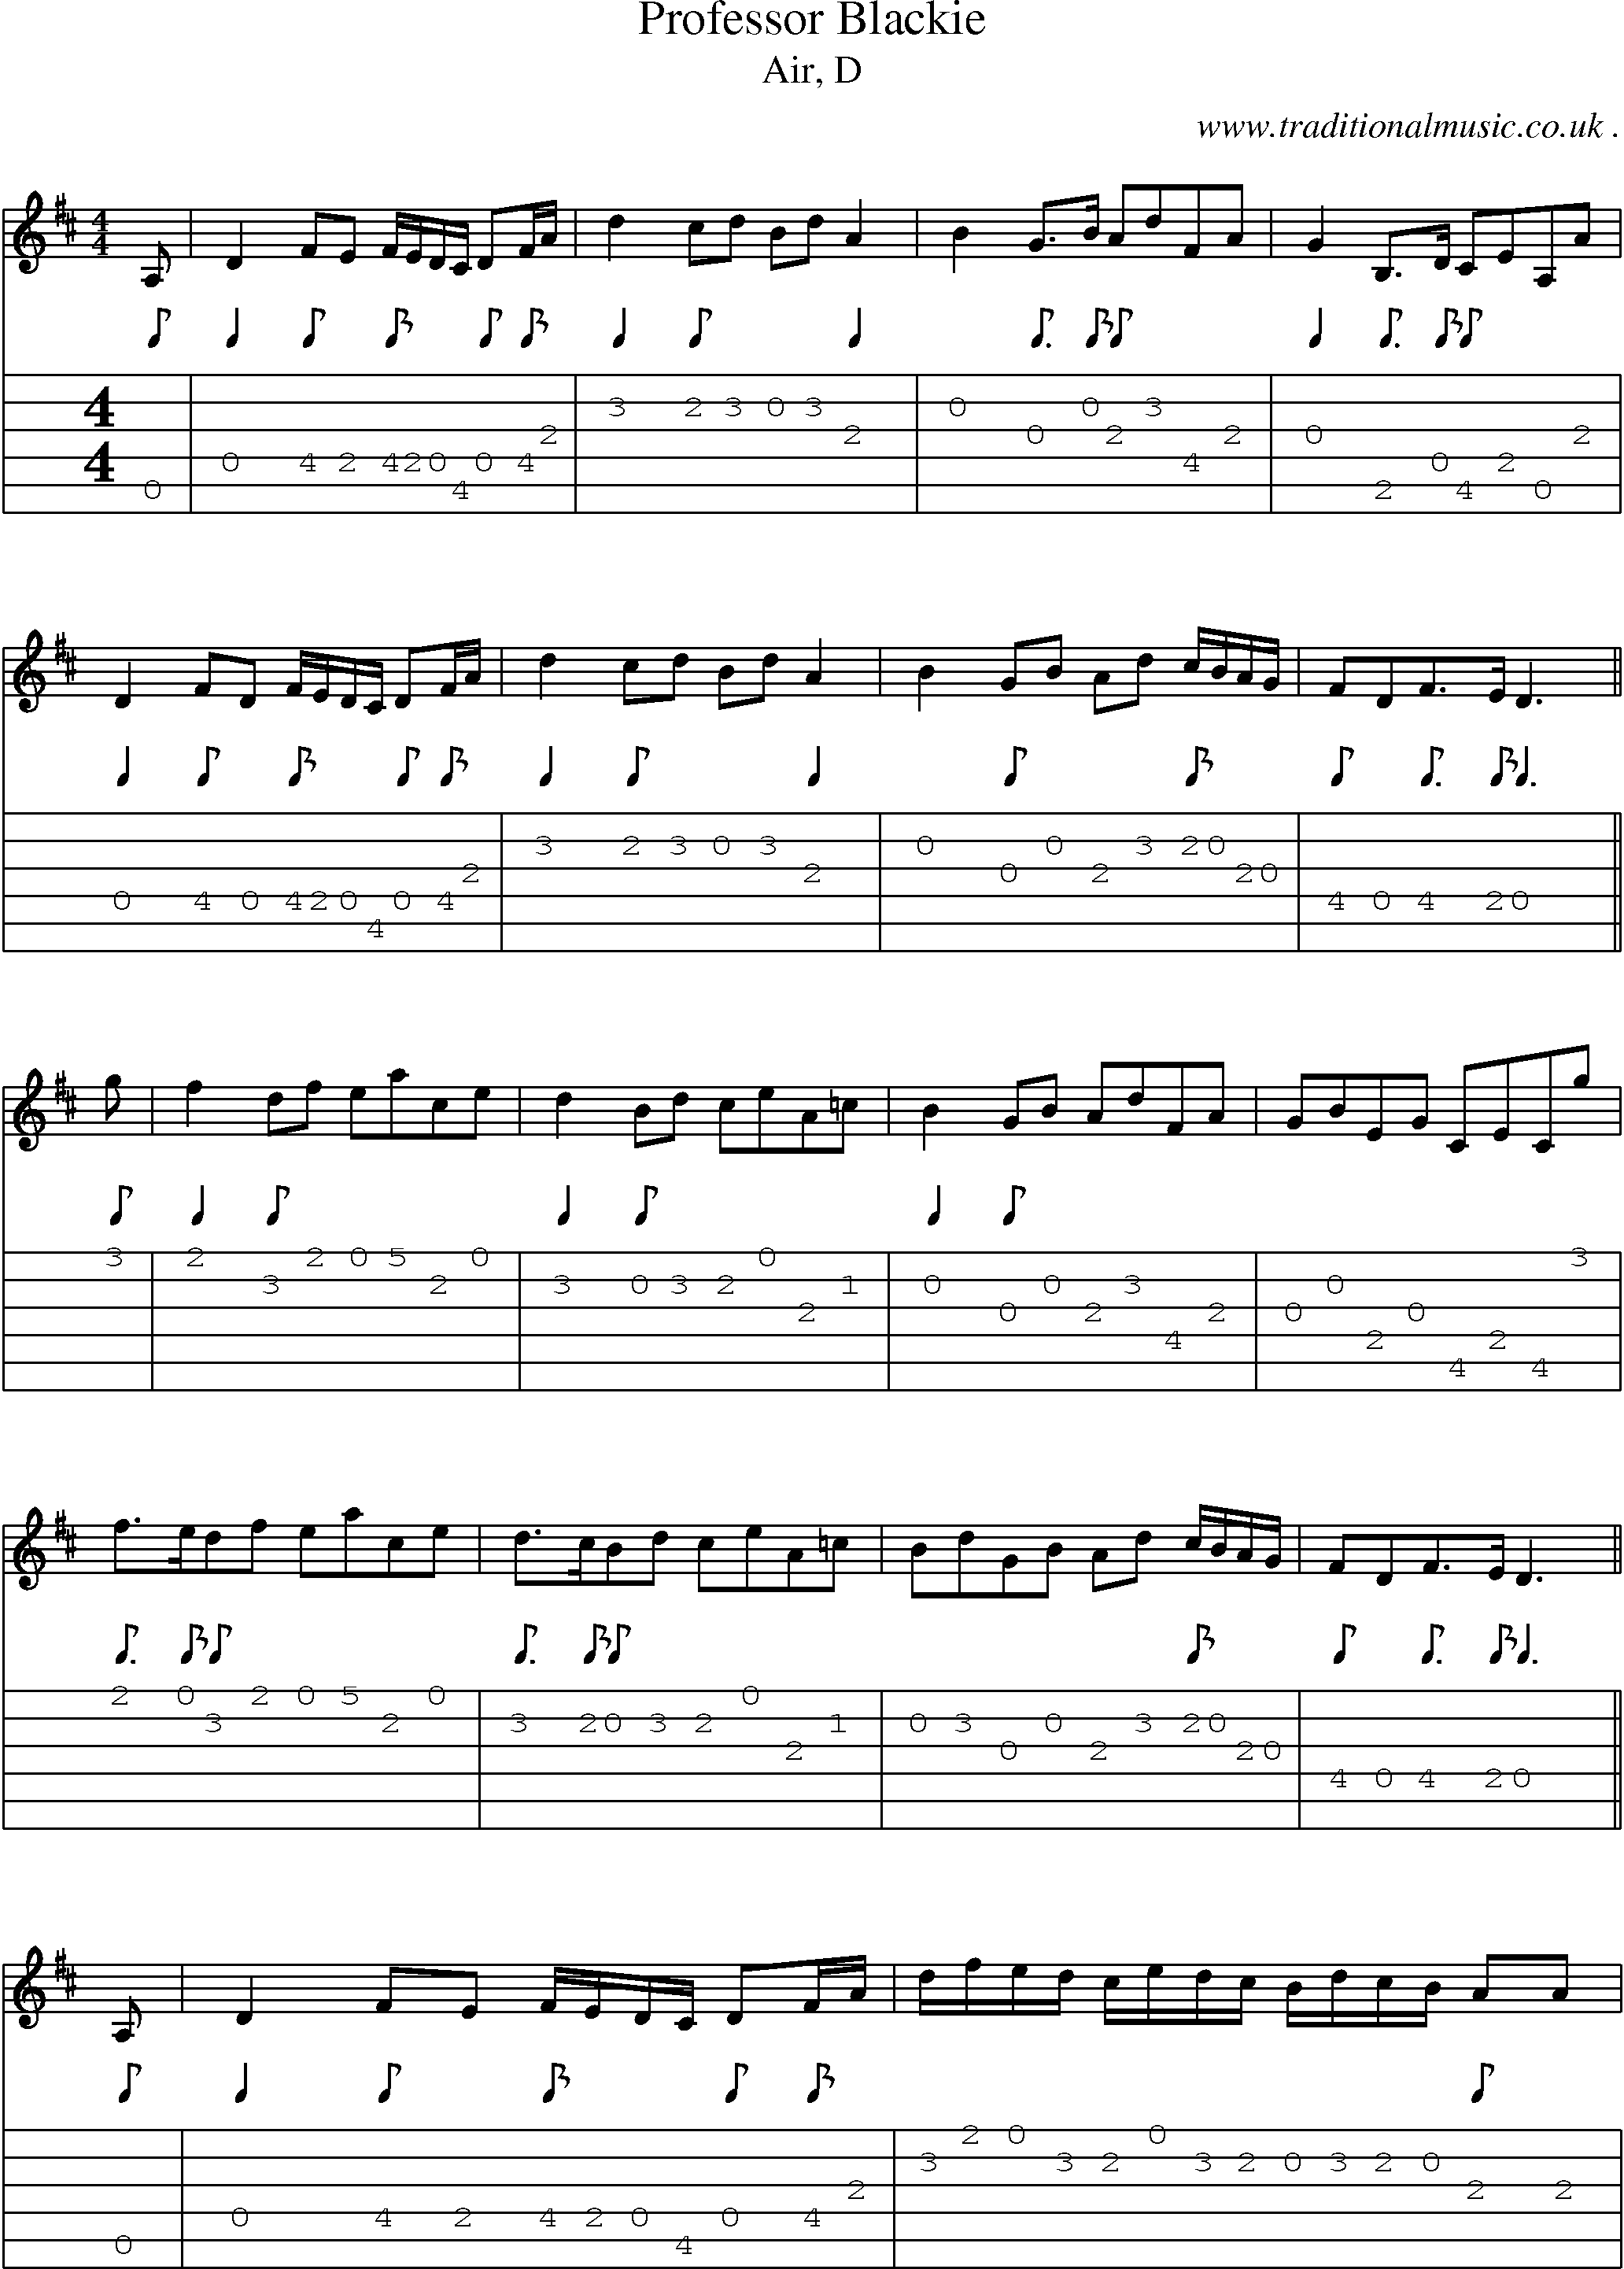 Sheet-music  score, Chords and Guitar Tabs for Professor Blackie